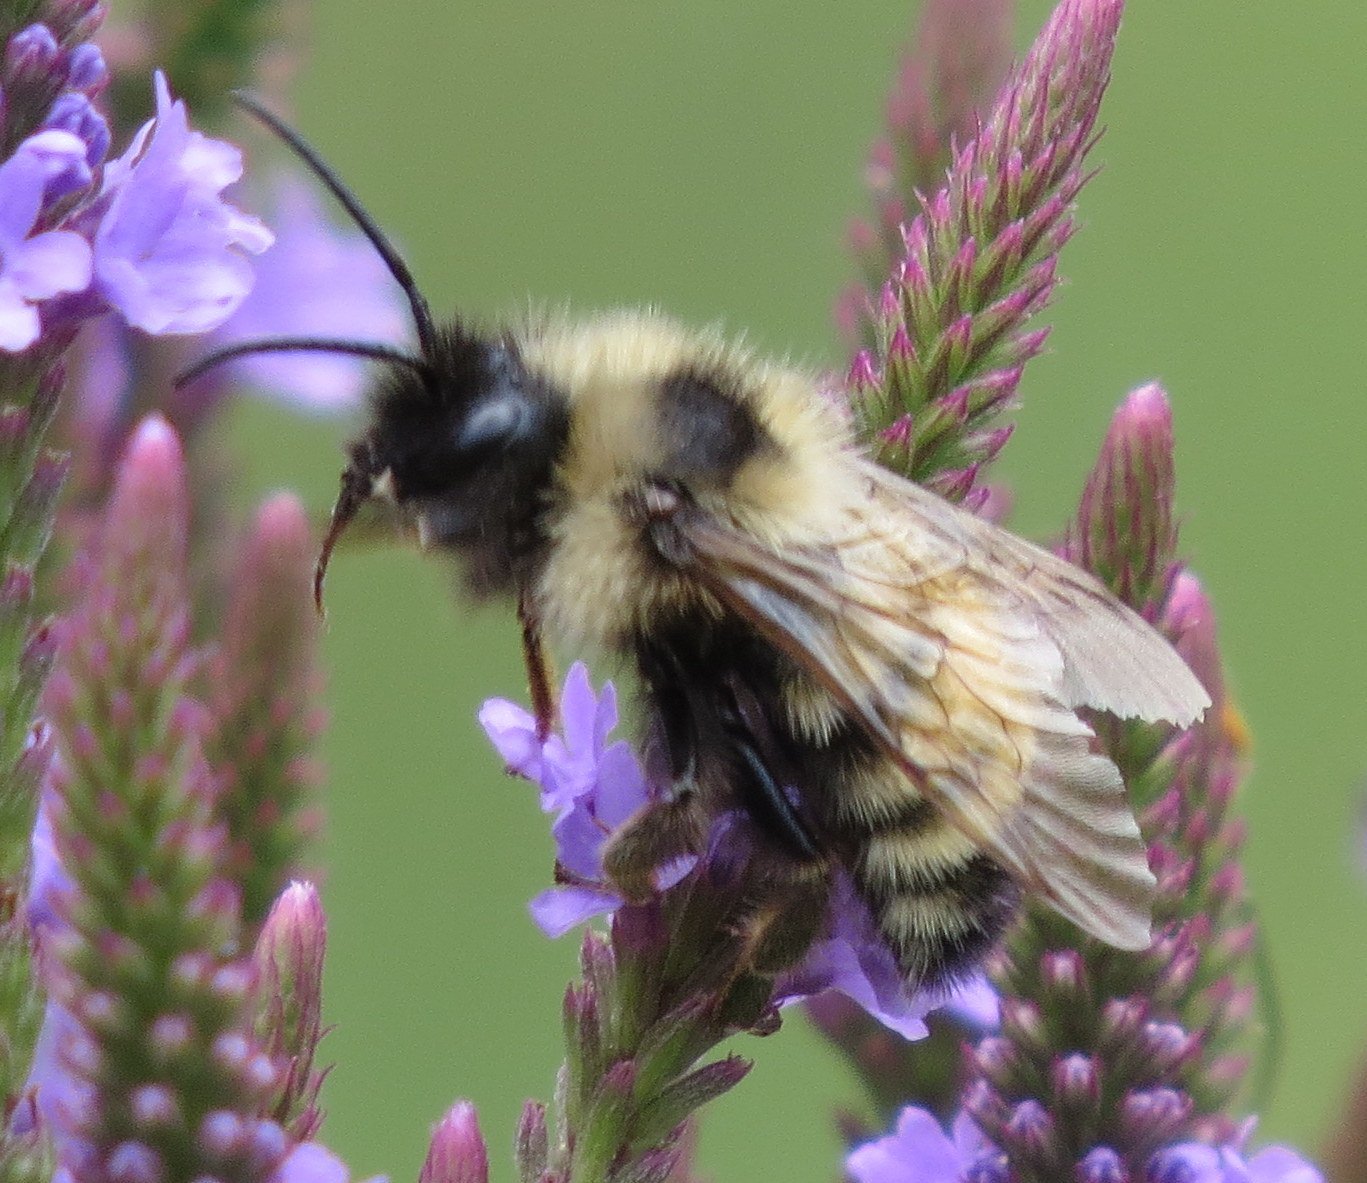 B inularis, a/k/a The Indiscriminate Cuckoo Bumble Bee